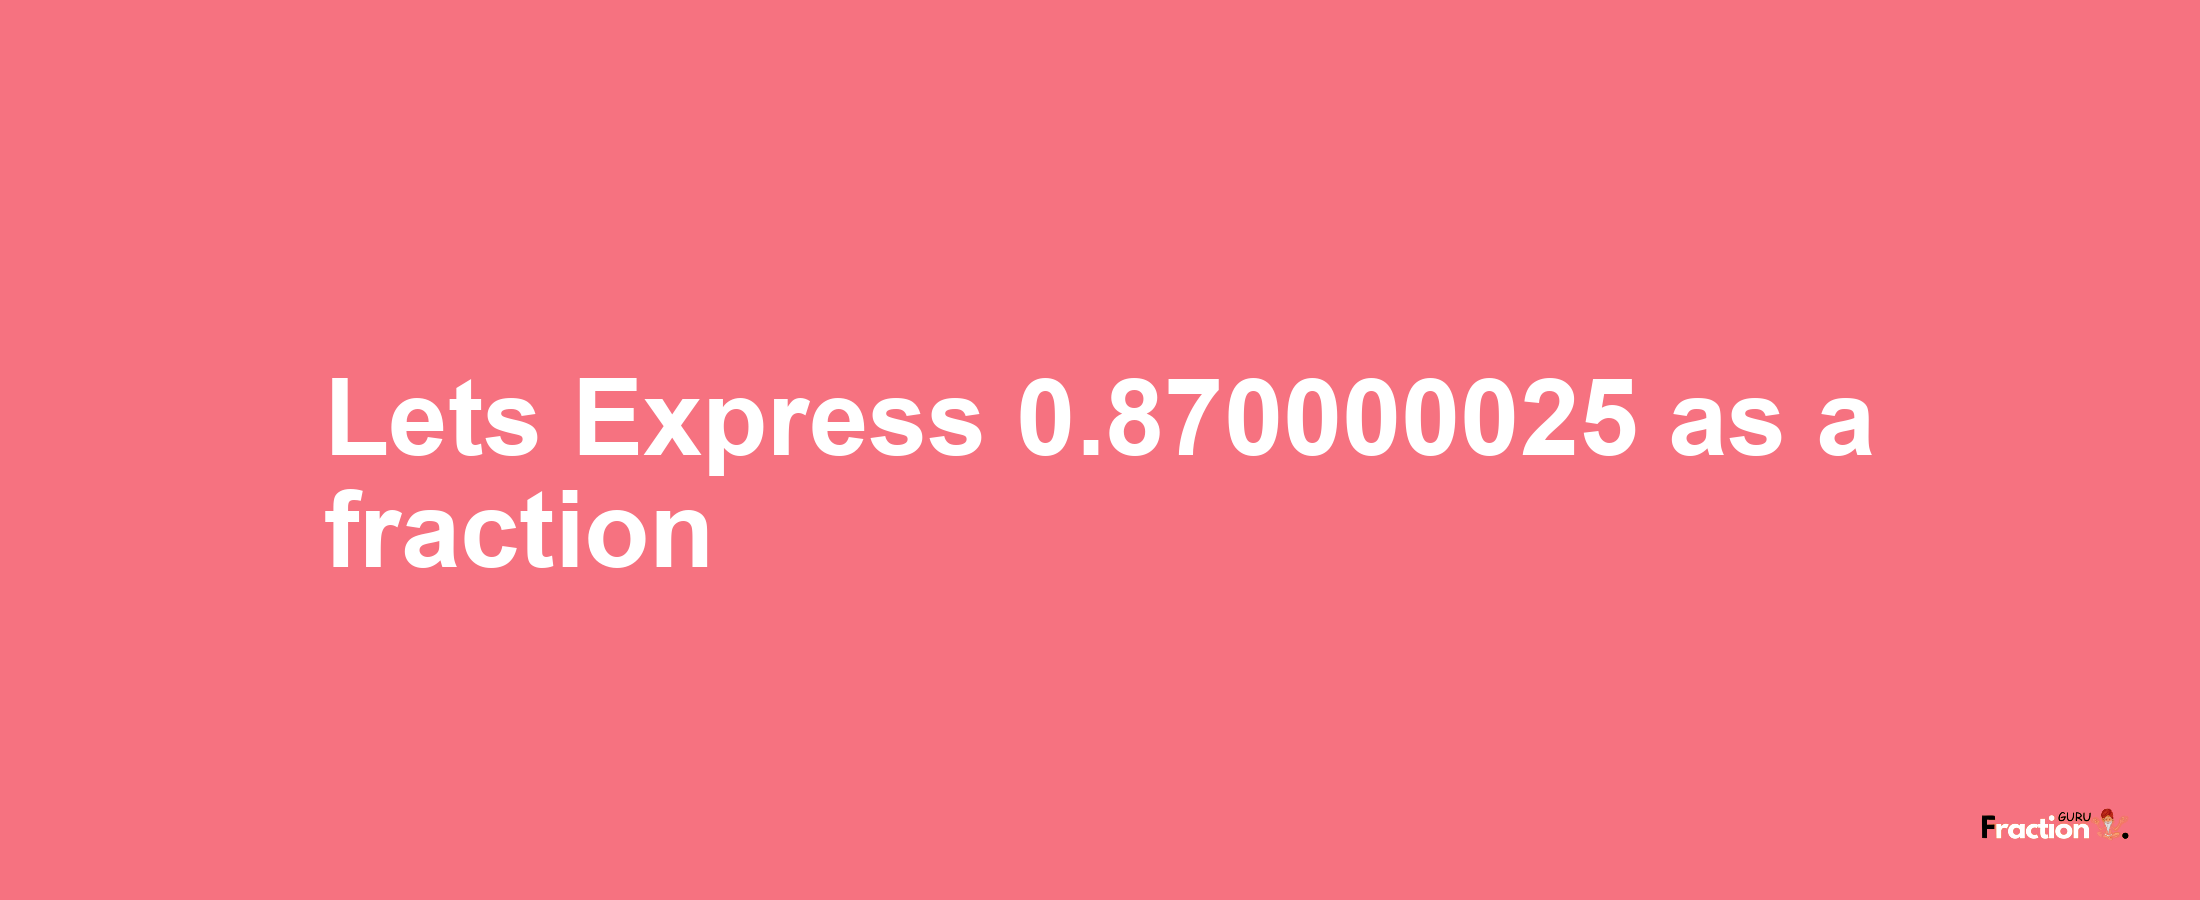 Lets Express 0.870000025 as afraction